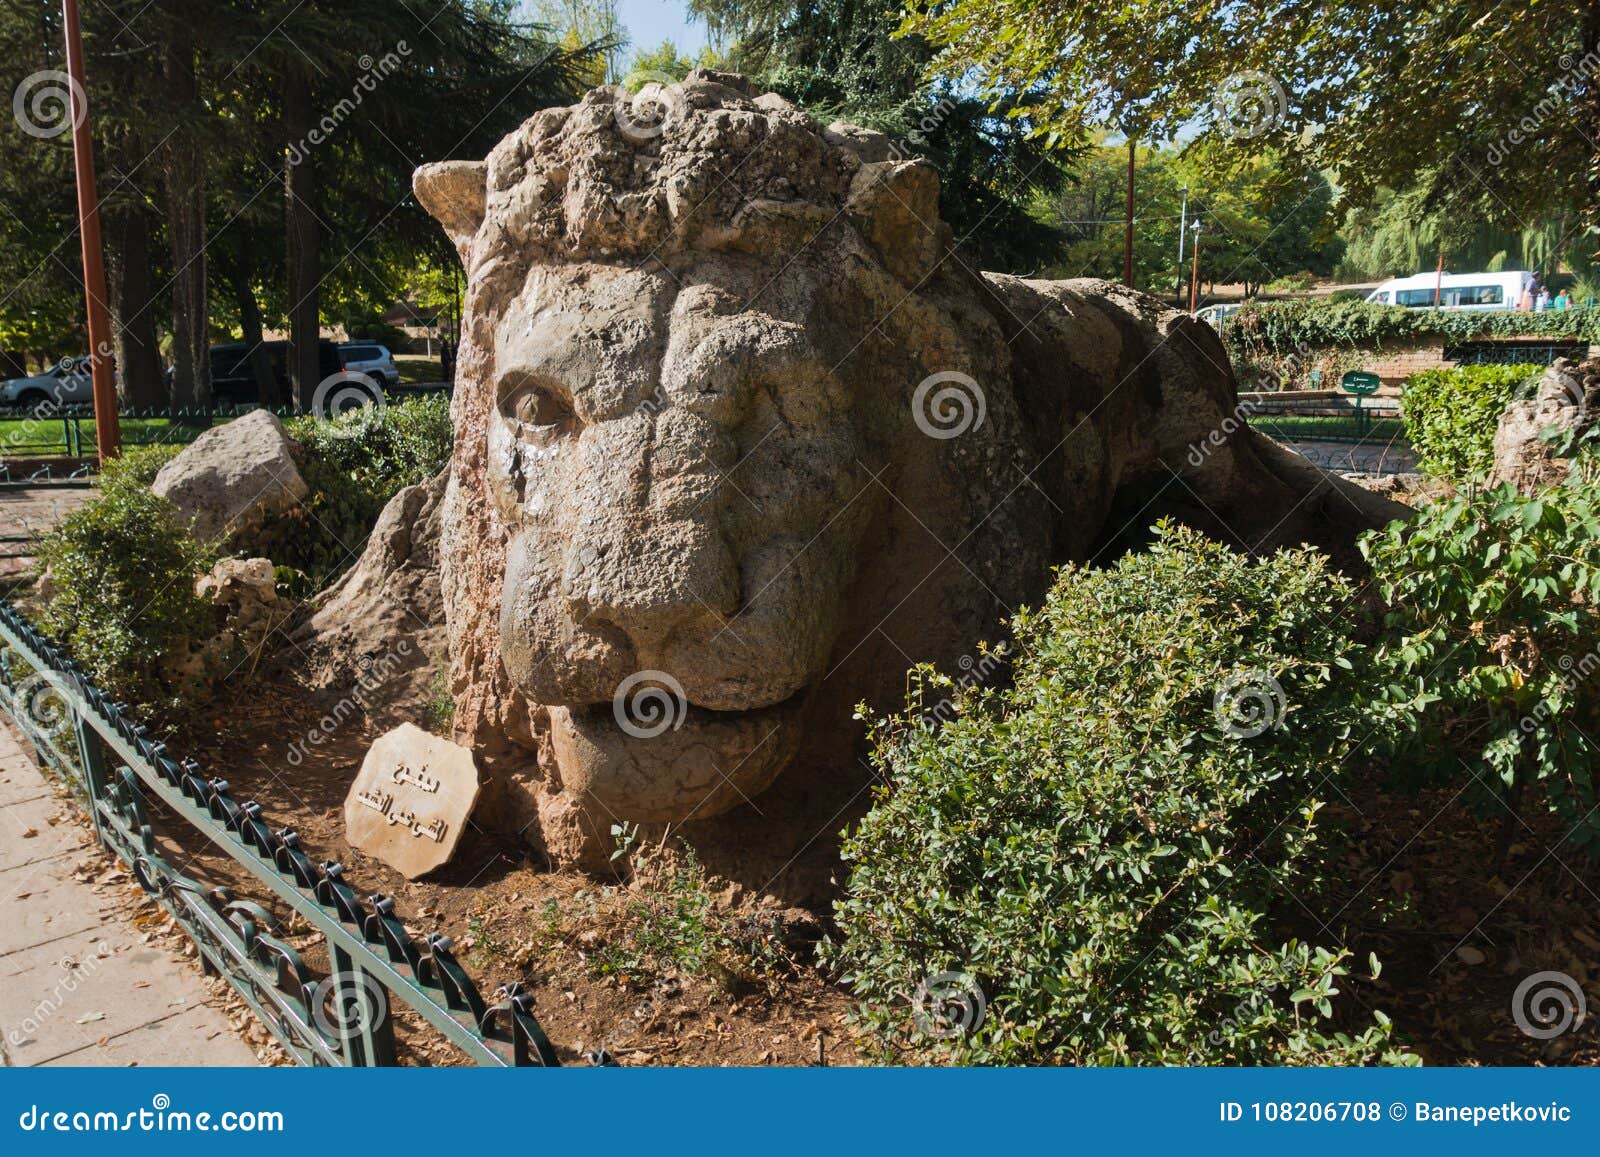 stone lion monument in ifrane is a cult landmark in mid atlas, morroco